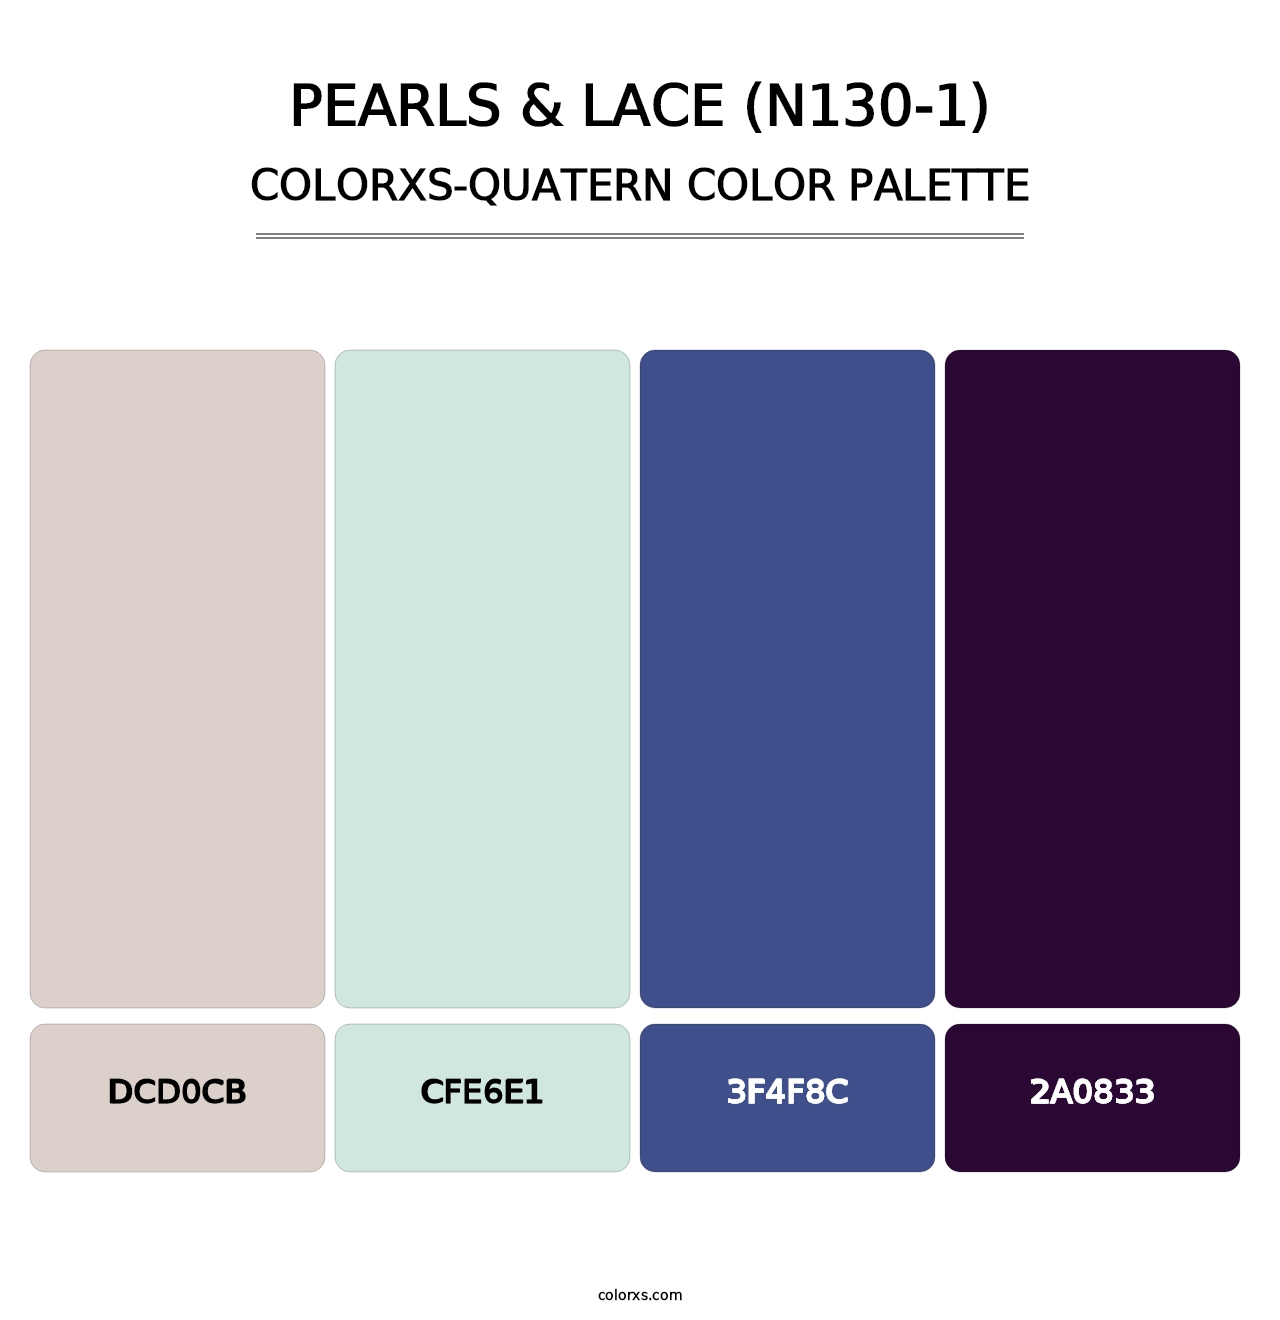 Pearls & Lace (N130-1) - Colorxs Quatern Palette